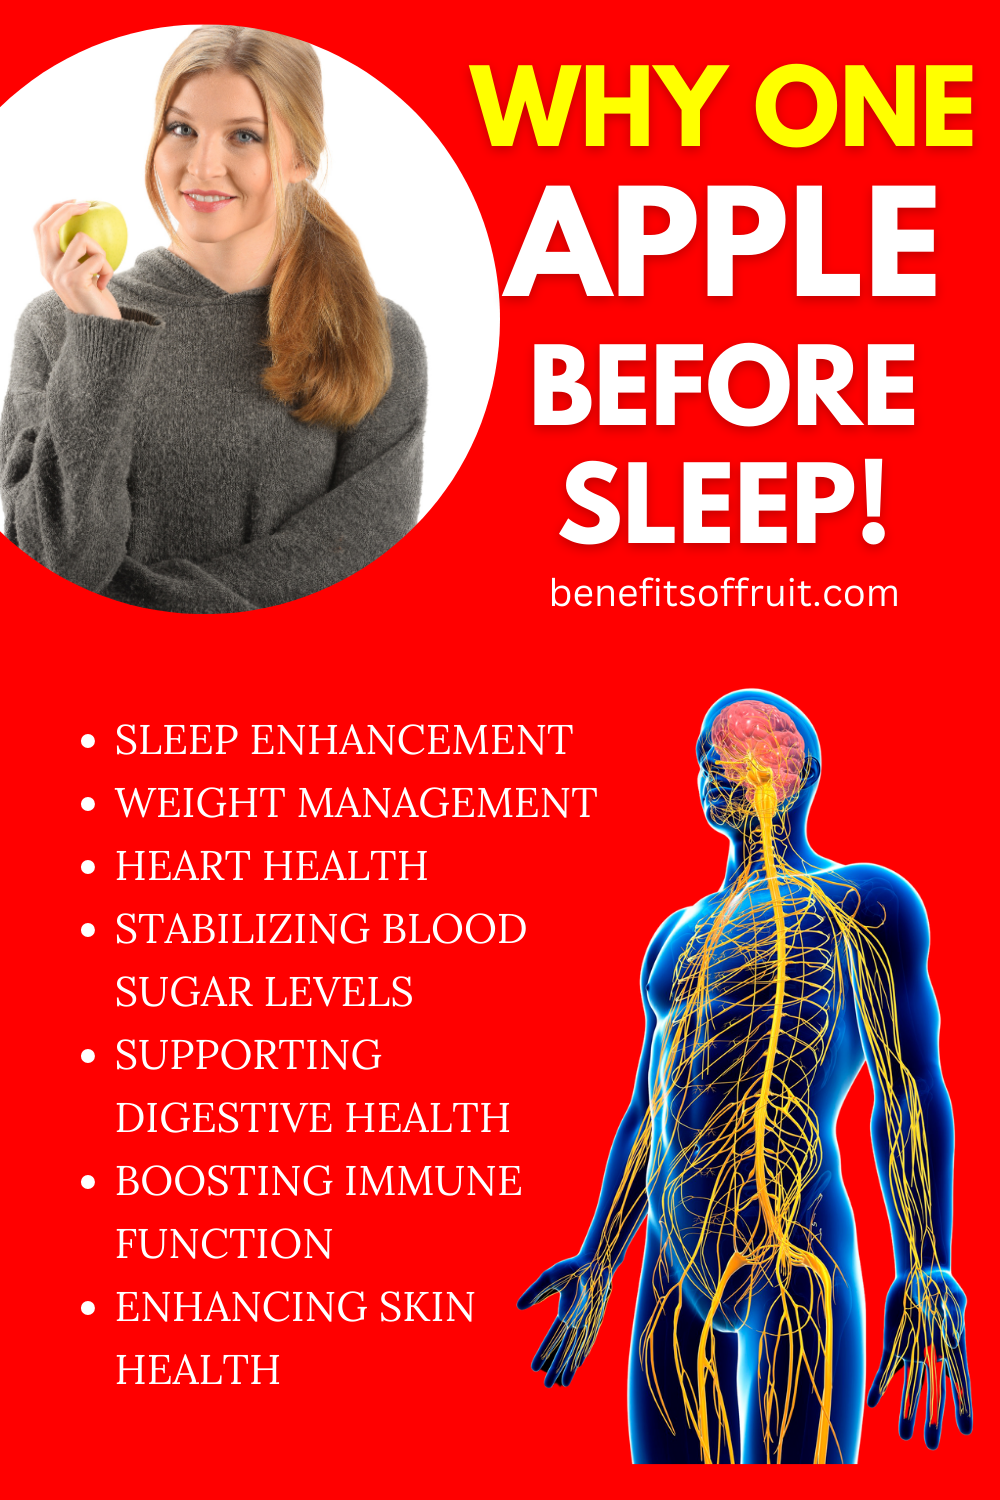 Why you should eat one apple before sleep